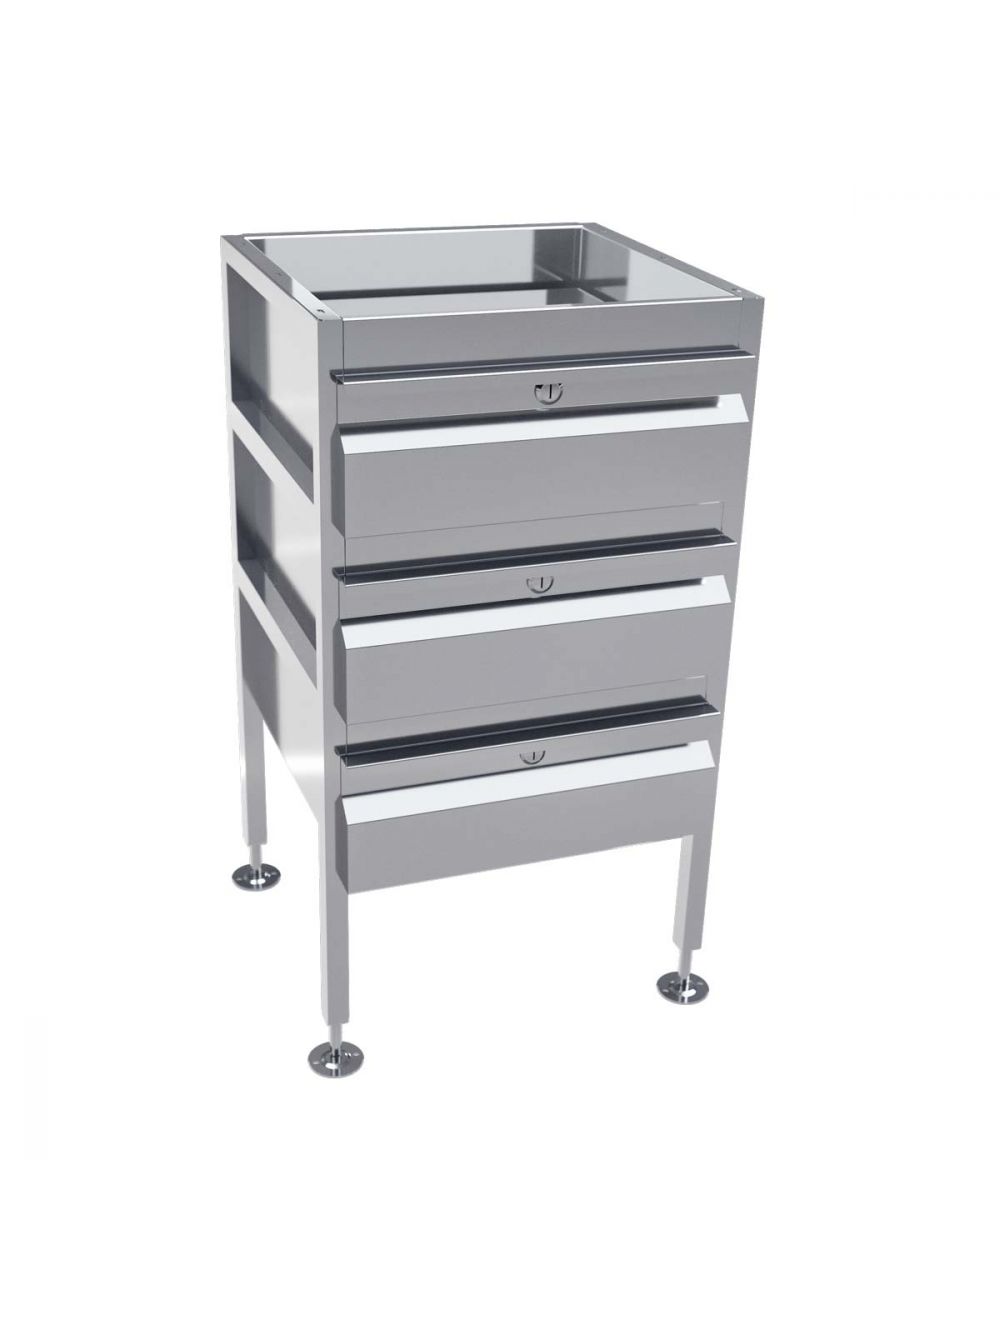 Lockable Freestanding Stainless Steel Drawer Unit (3 drawers)